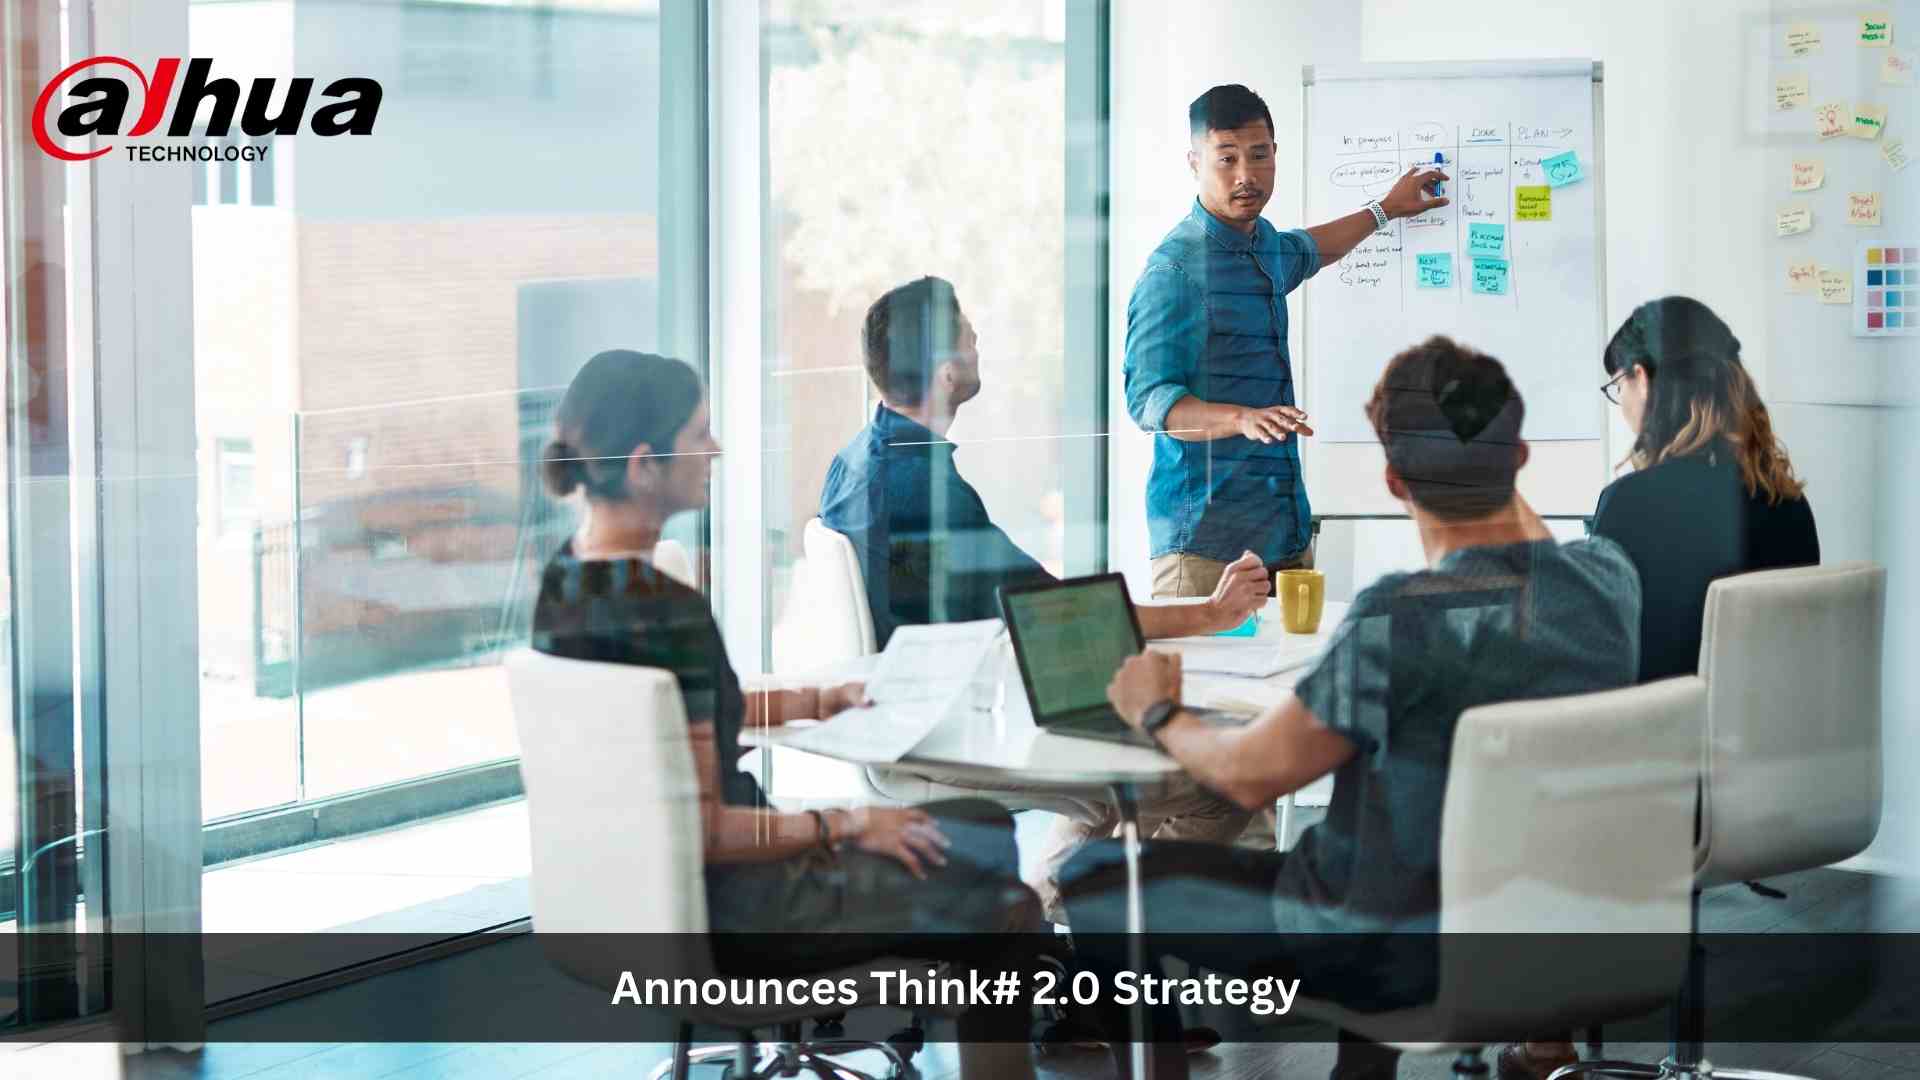 Dahua Announces Think# 2.0 Strategy to Accelerate Innovation for a Digital Intelligent Future